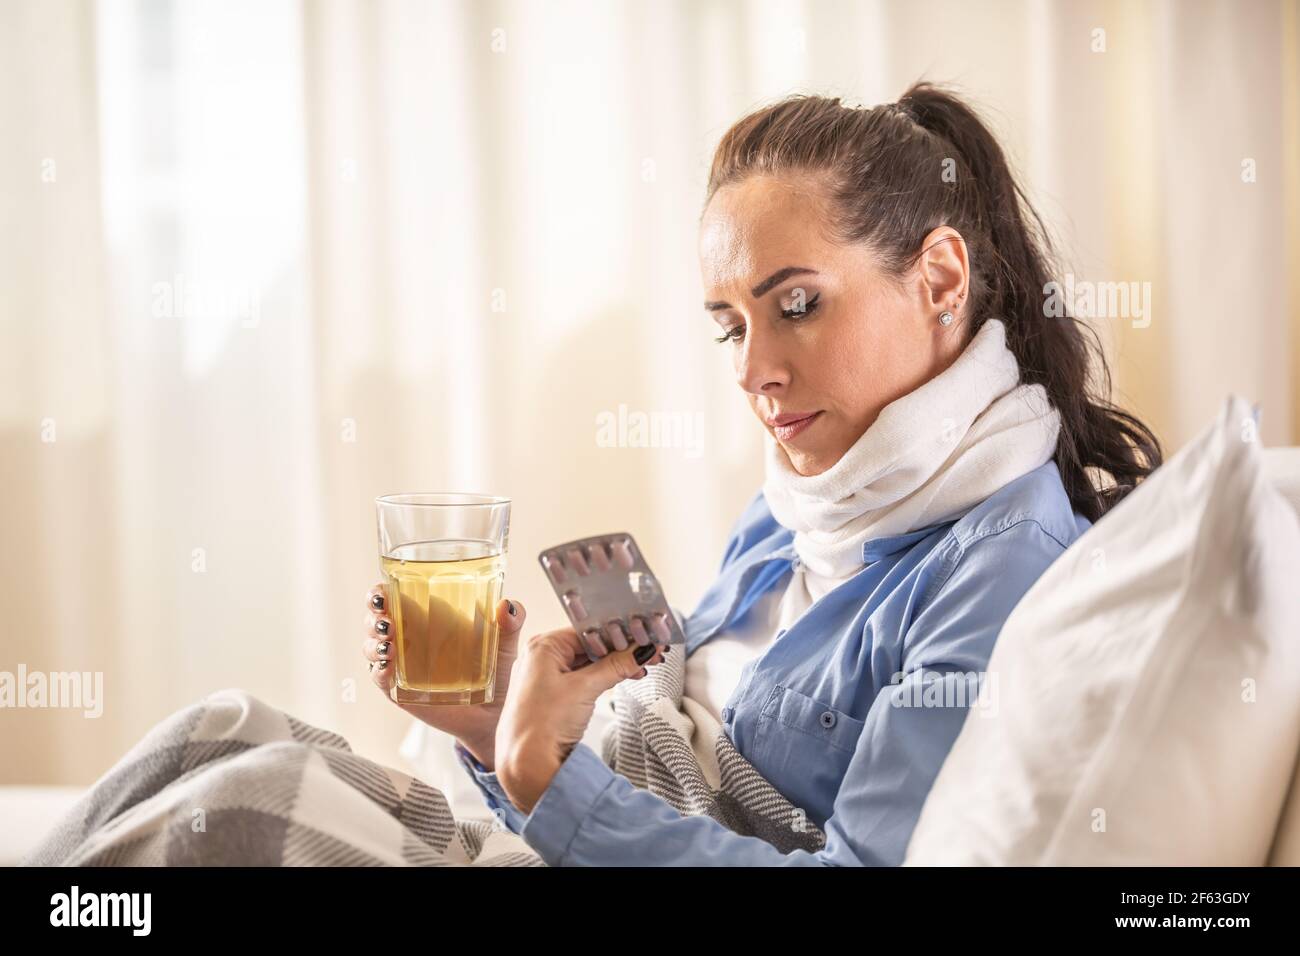 Woman in home treatment checks the blister pack of medicine holding hot tea cup in the other hand. Stock Photo